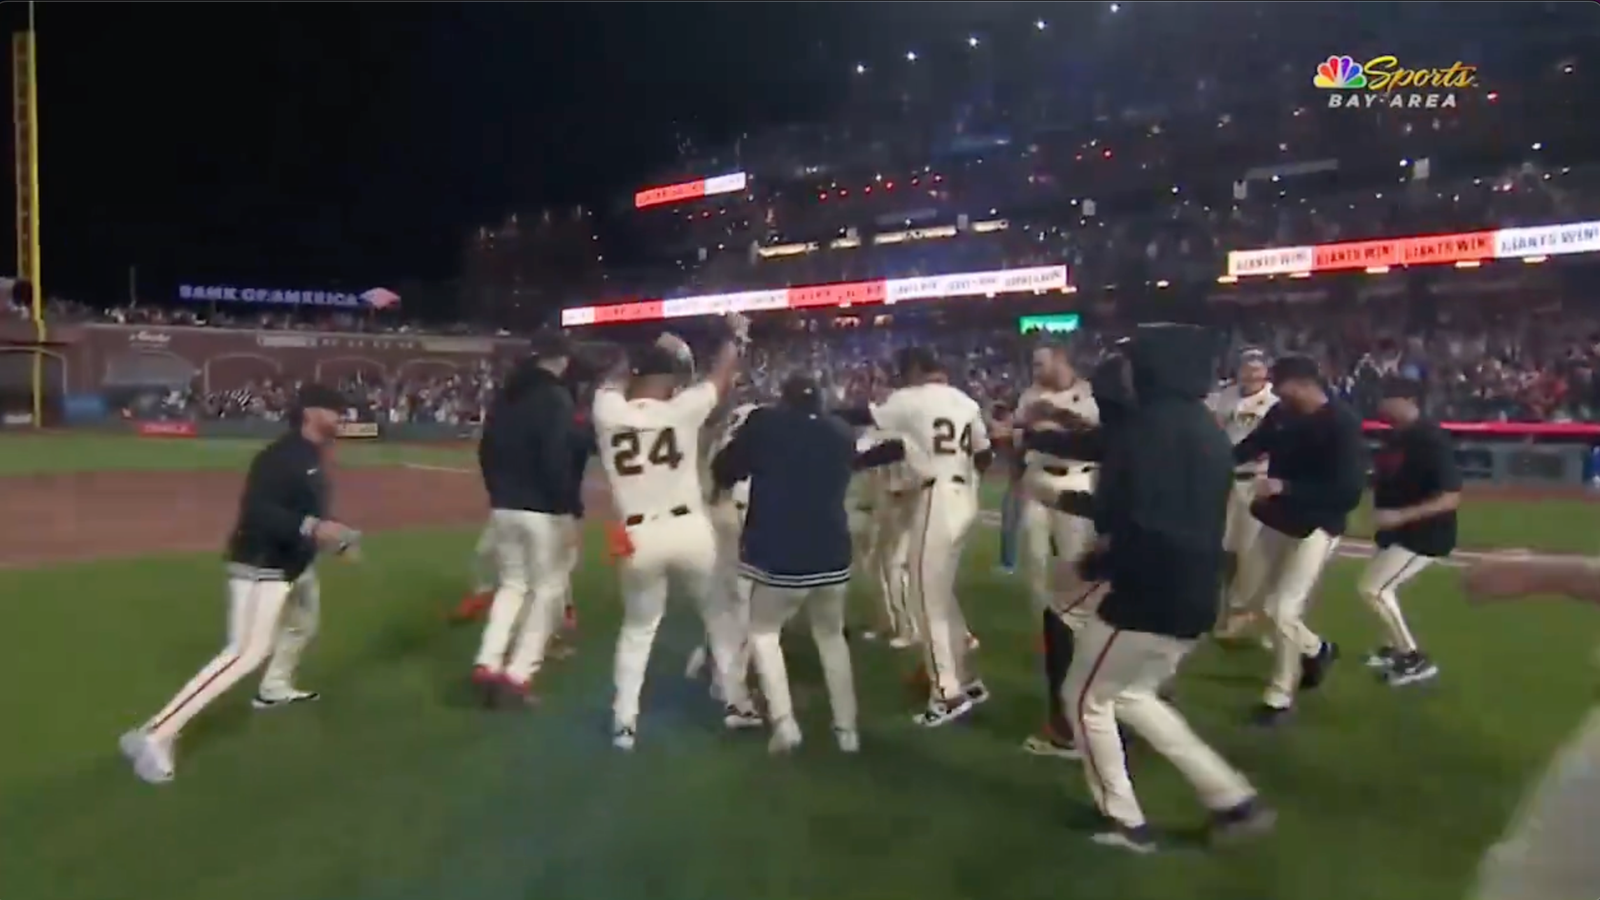 Wilmer Flores walks it off vs. Cubs on the night the Giants remember Willie Mays by wearing No. 24